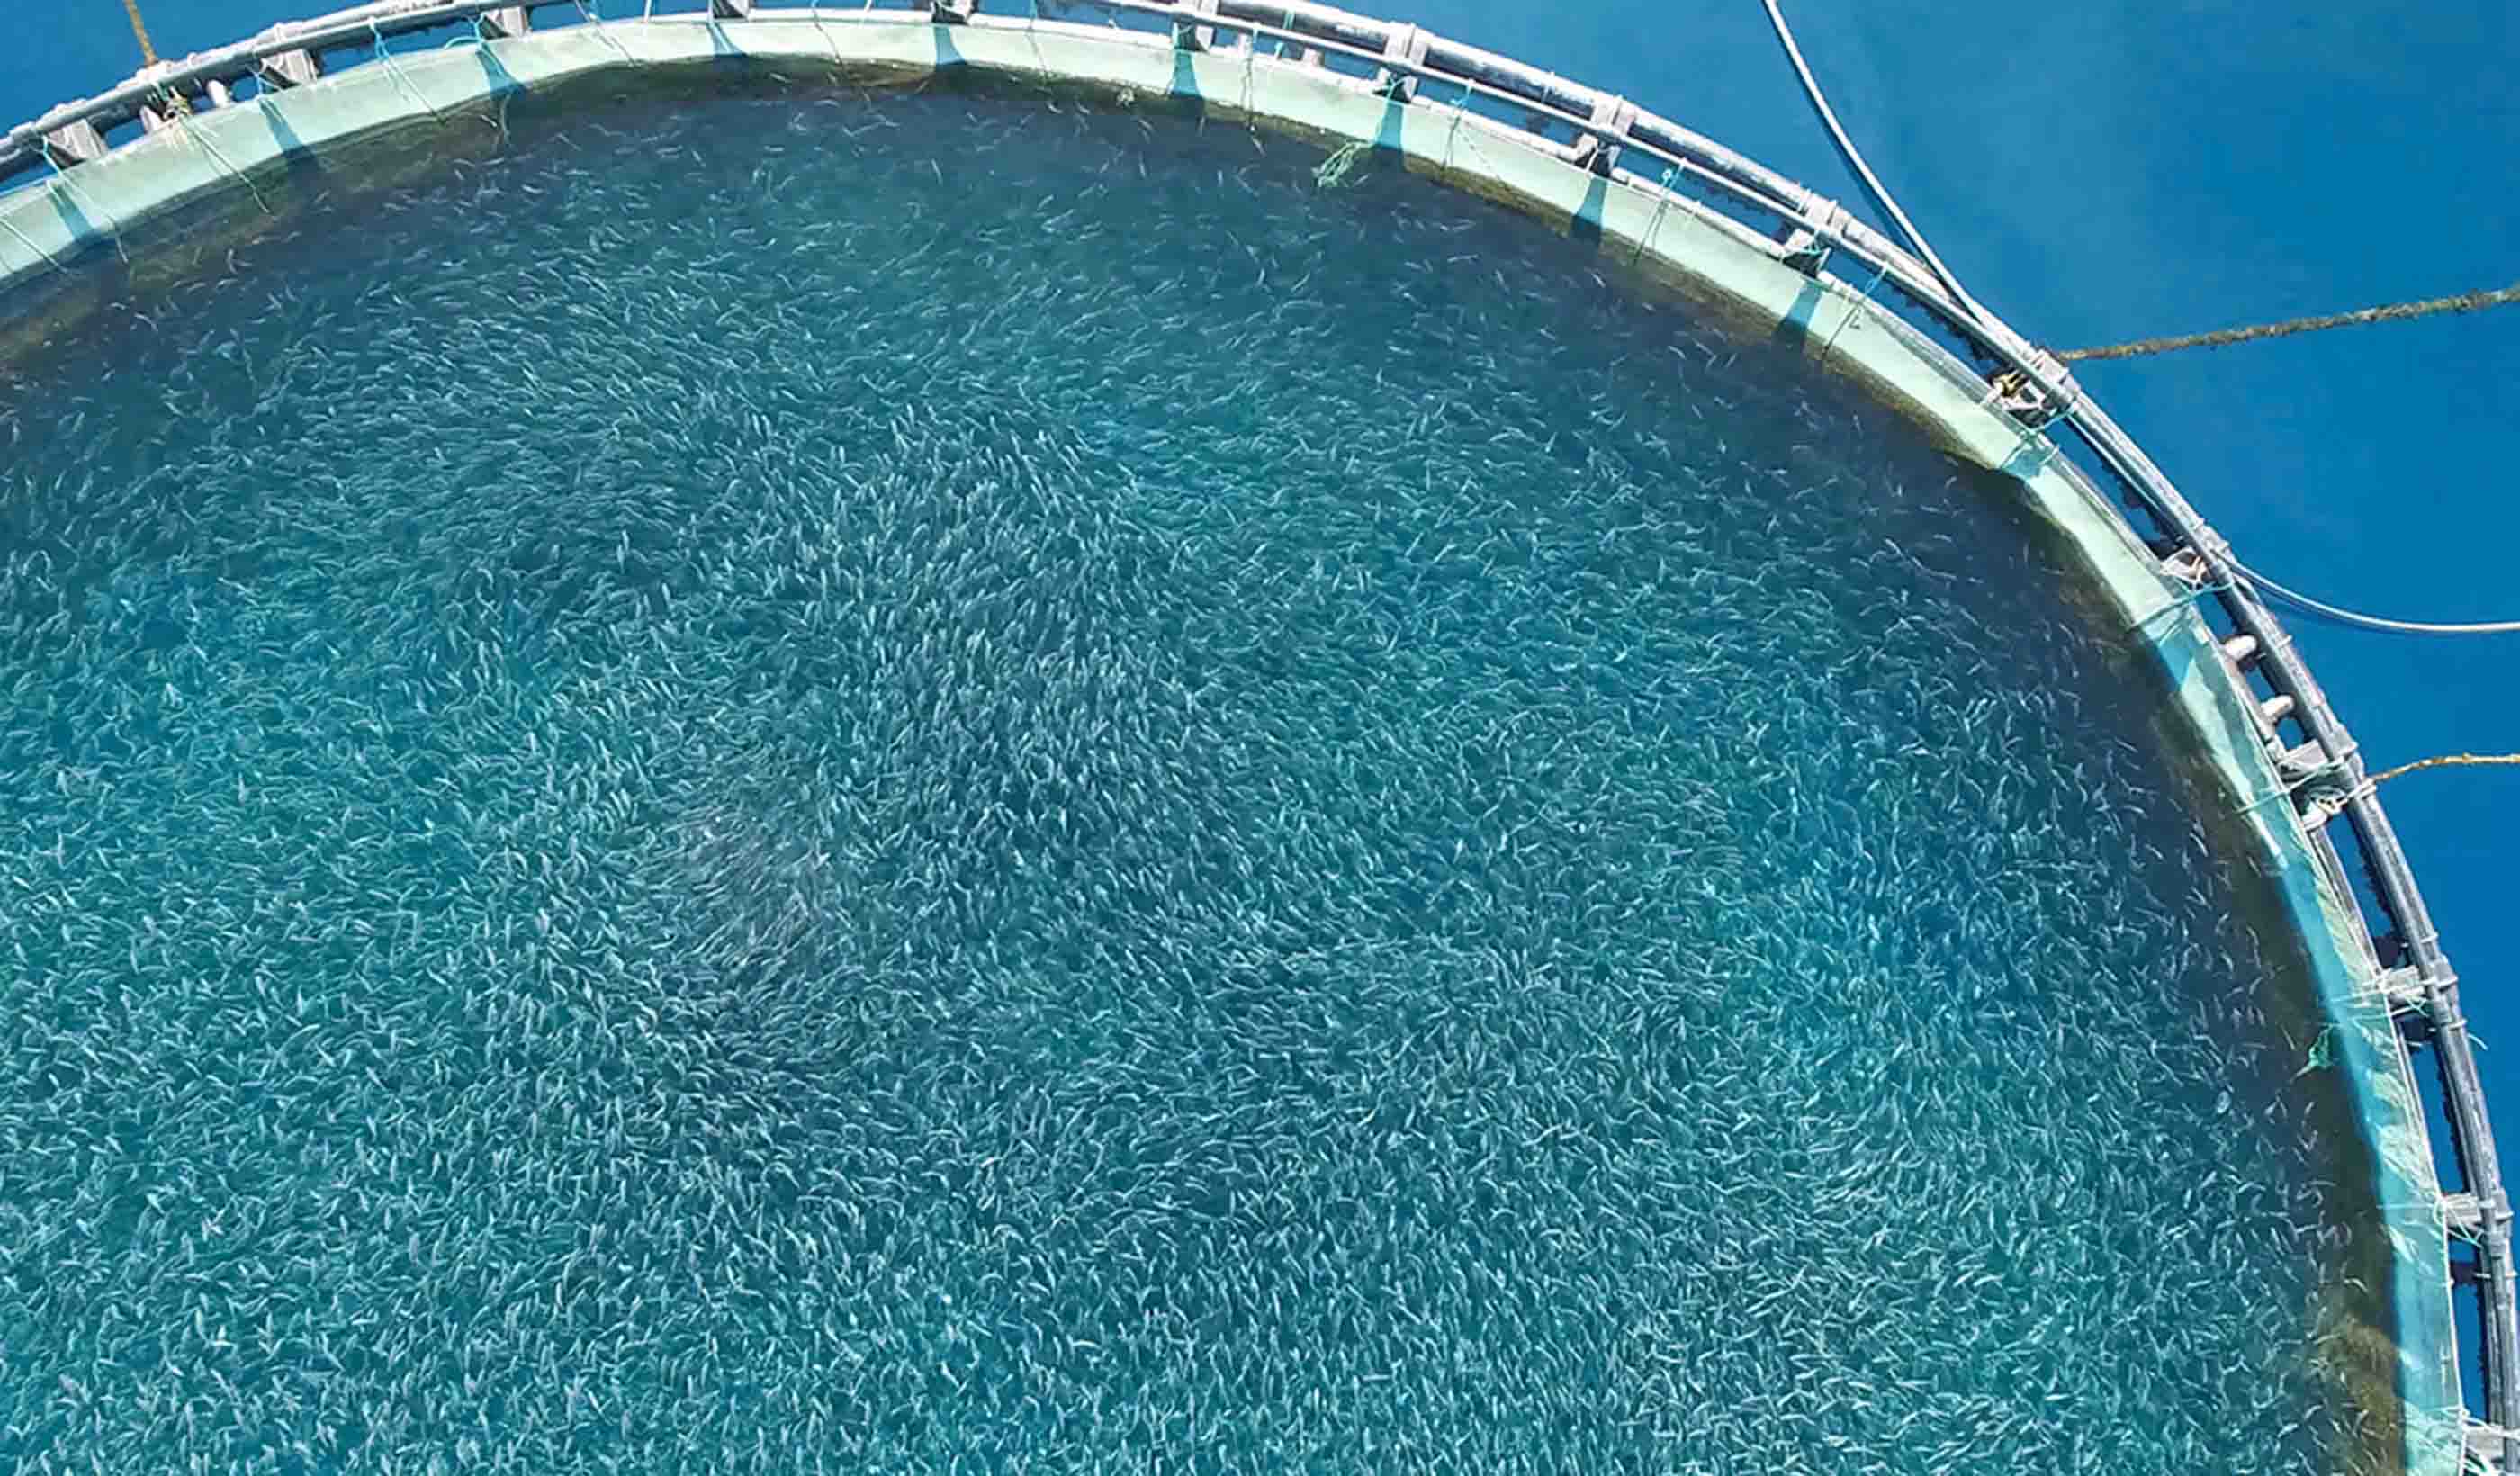 Global aquaculture trends: How the right approach helps offshore farms flourish